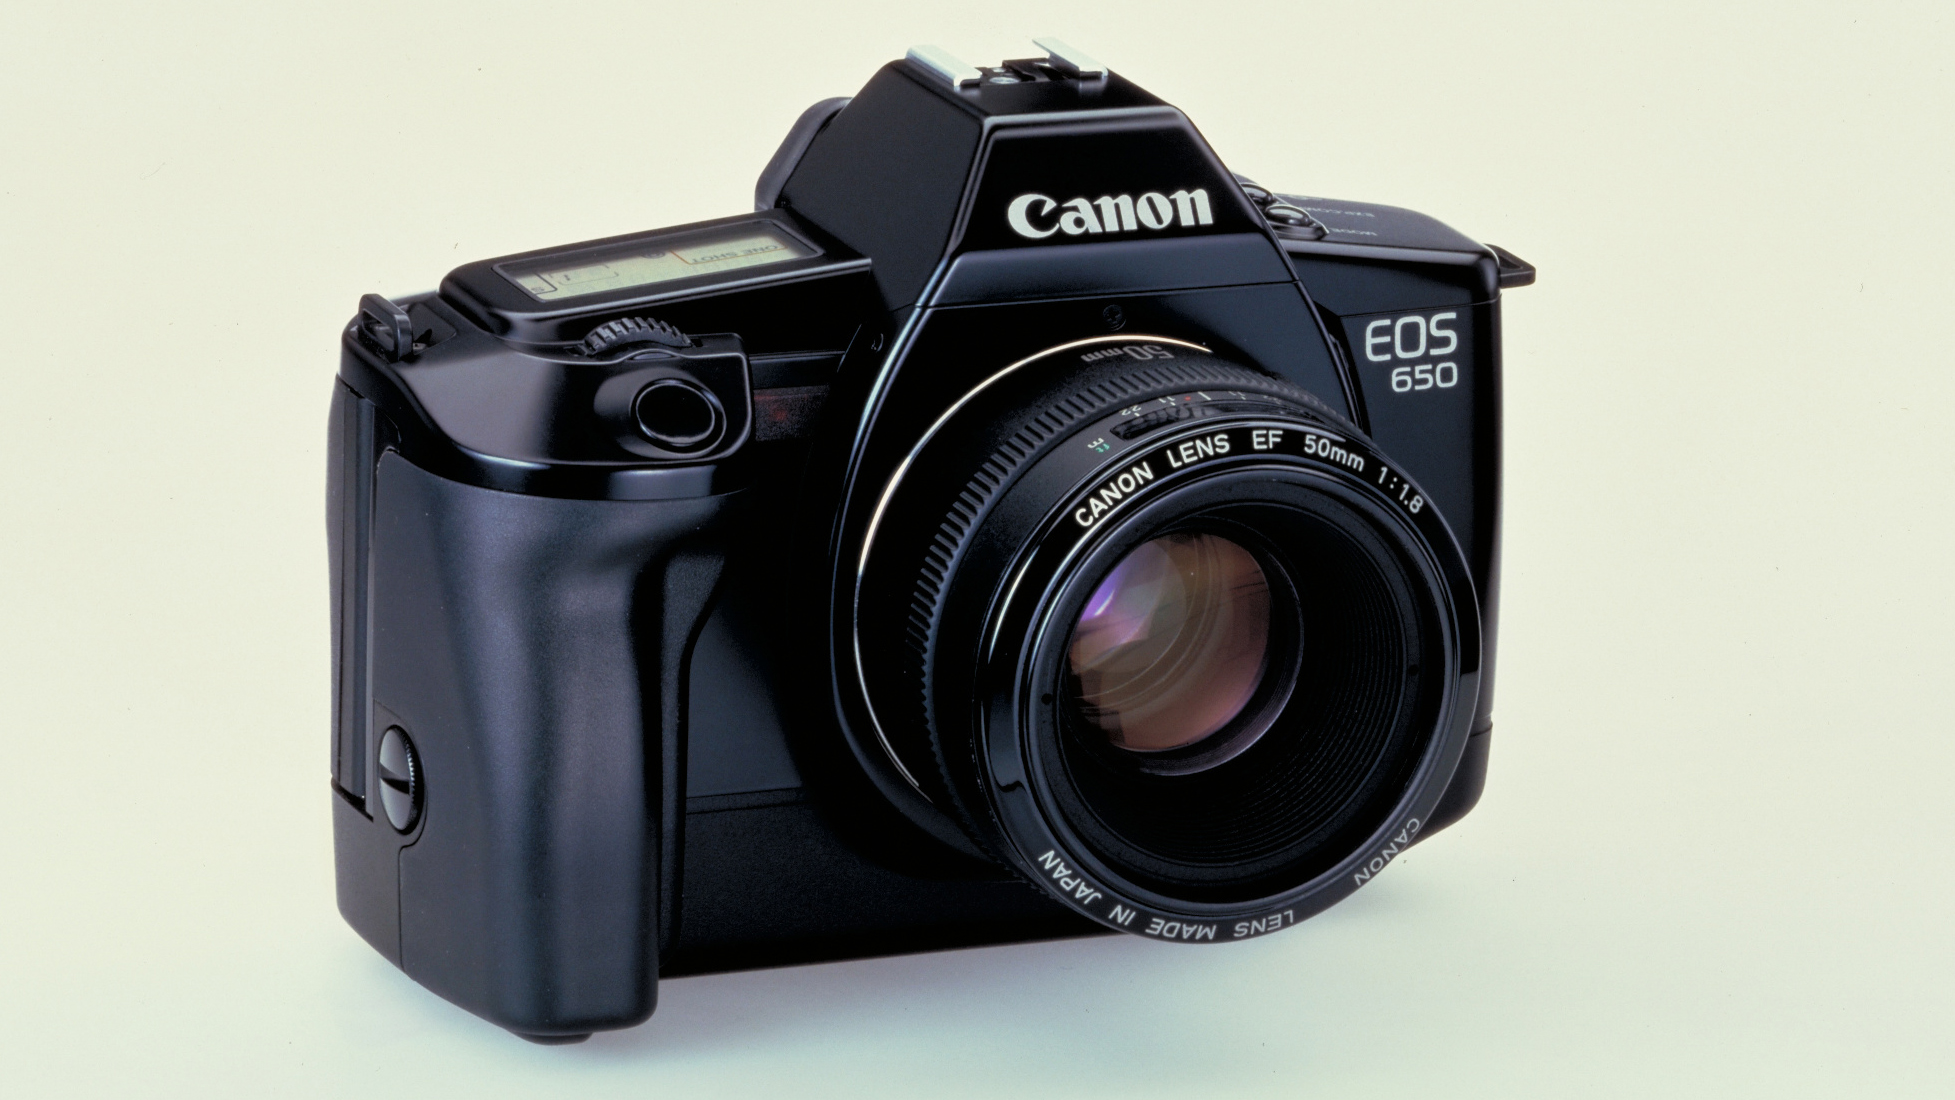 The Canon EOS 650 camera on a beige background